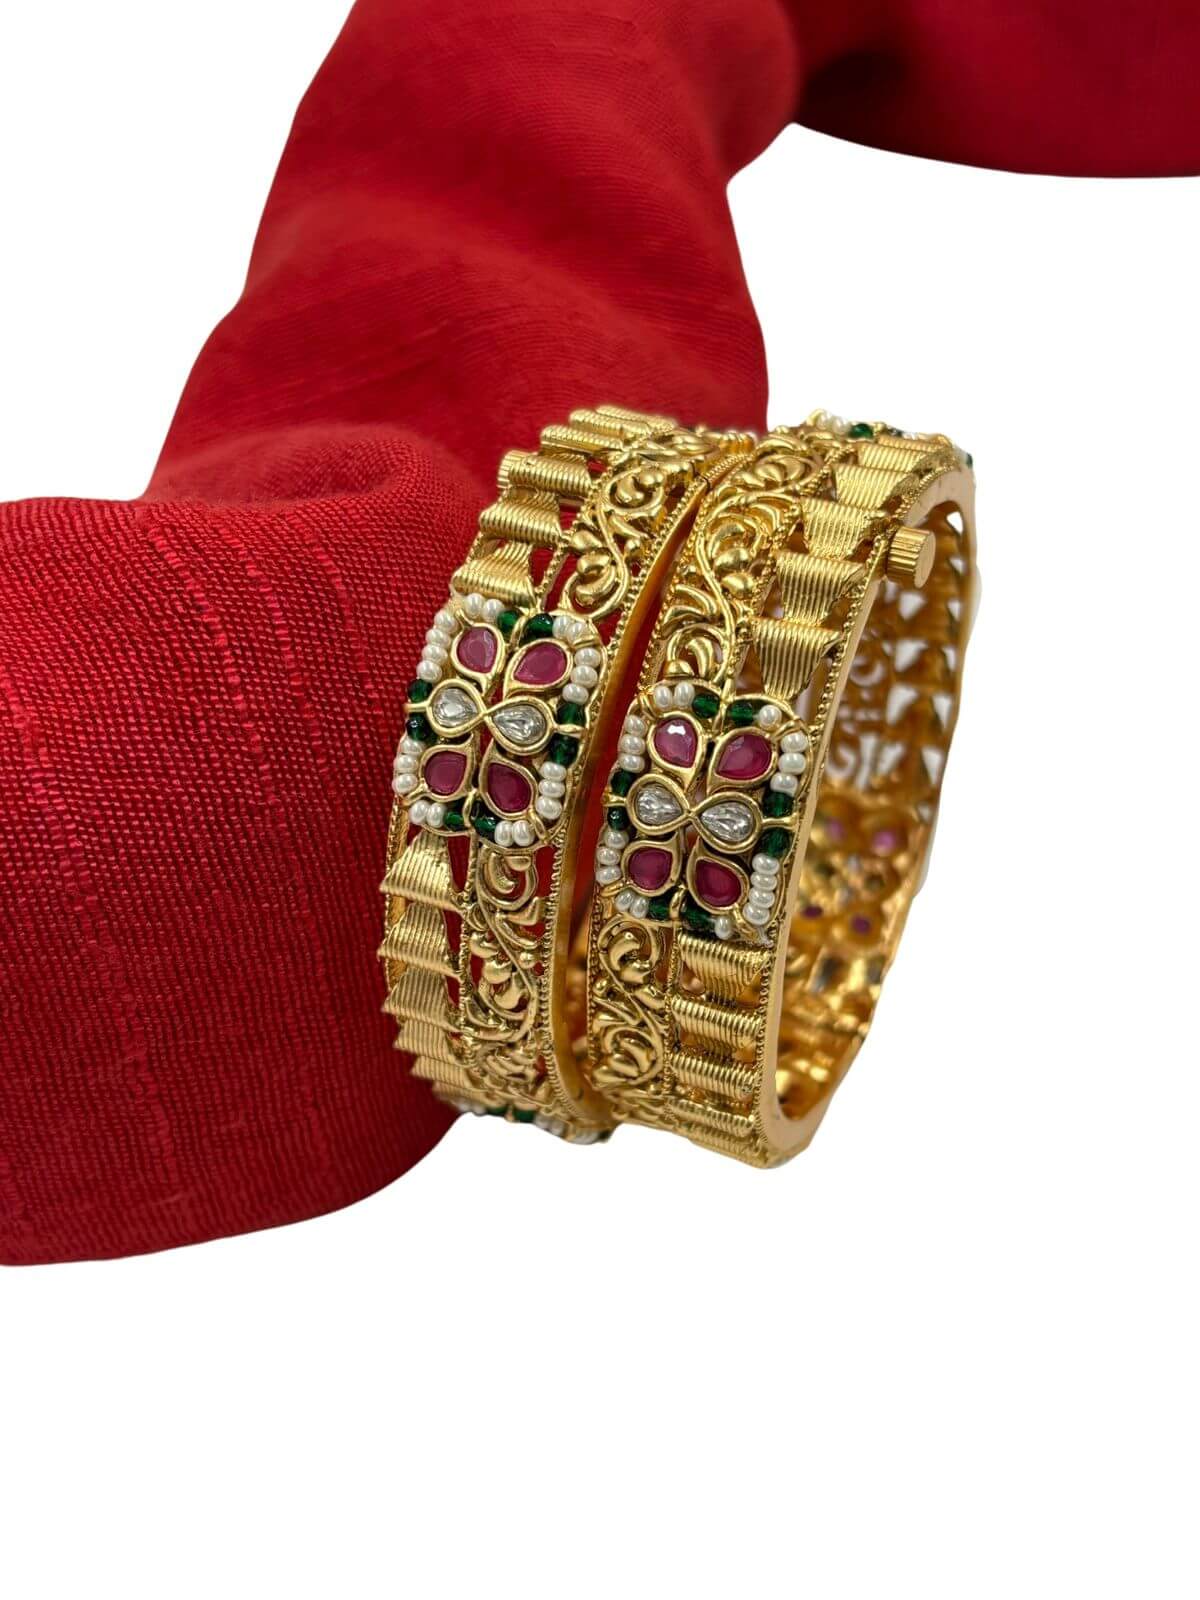 Sayali Gold Plated Antique Gold Bangles For Women By Gehna Shop